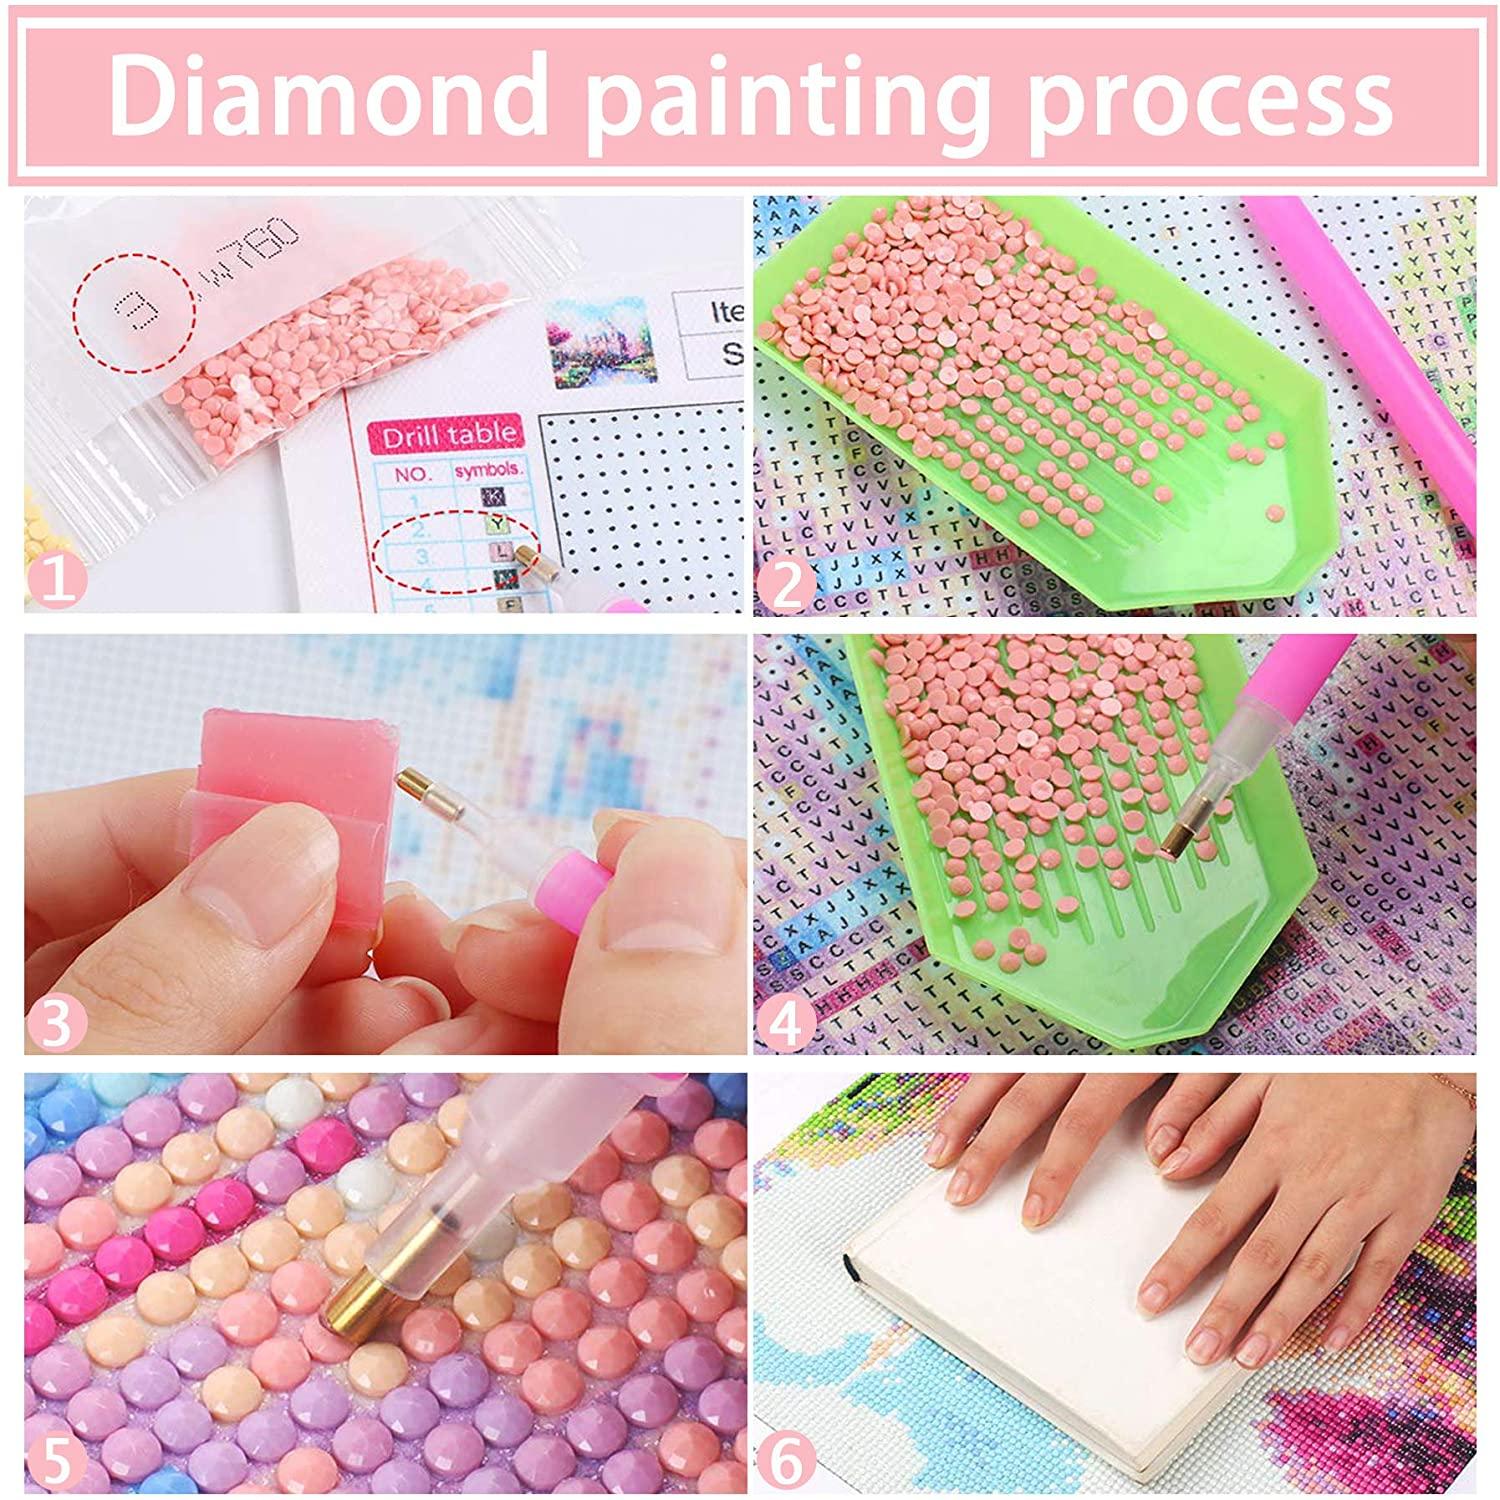 Bimkole 5D Diamond Painting Sunflower Full Drill by Number Kits DIY Rhinestone Pasted 12x16inch